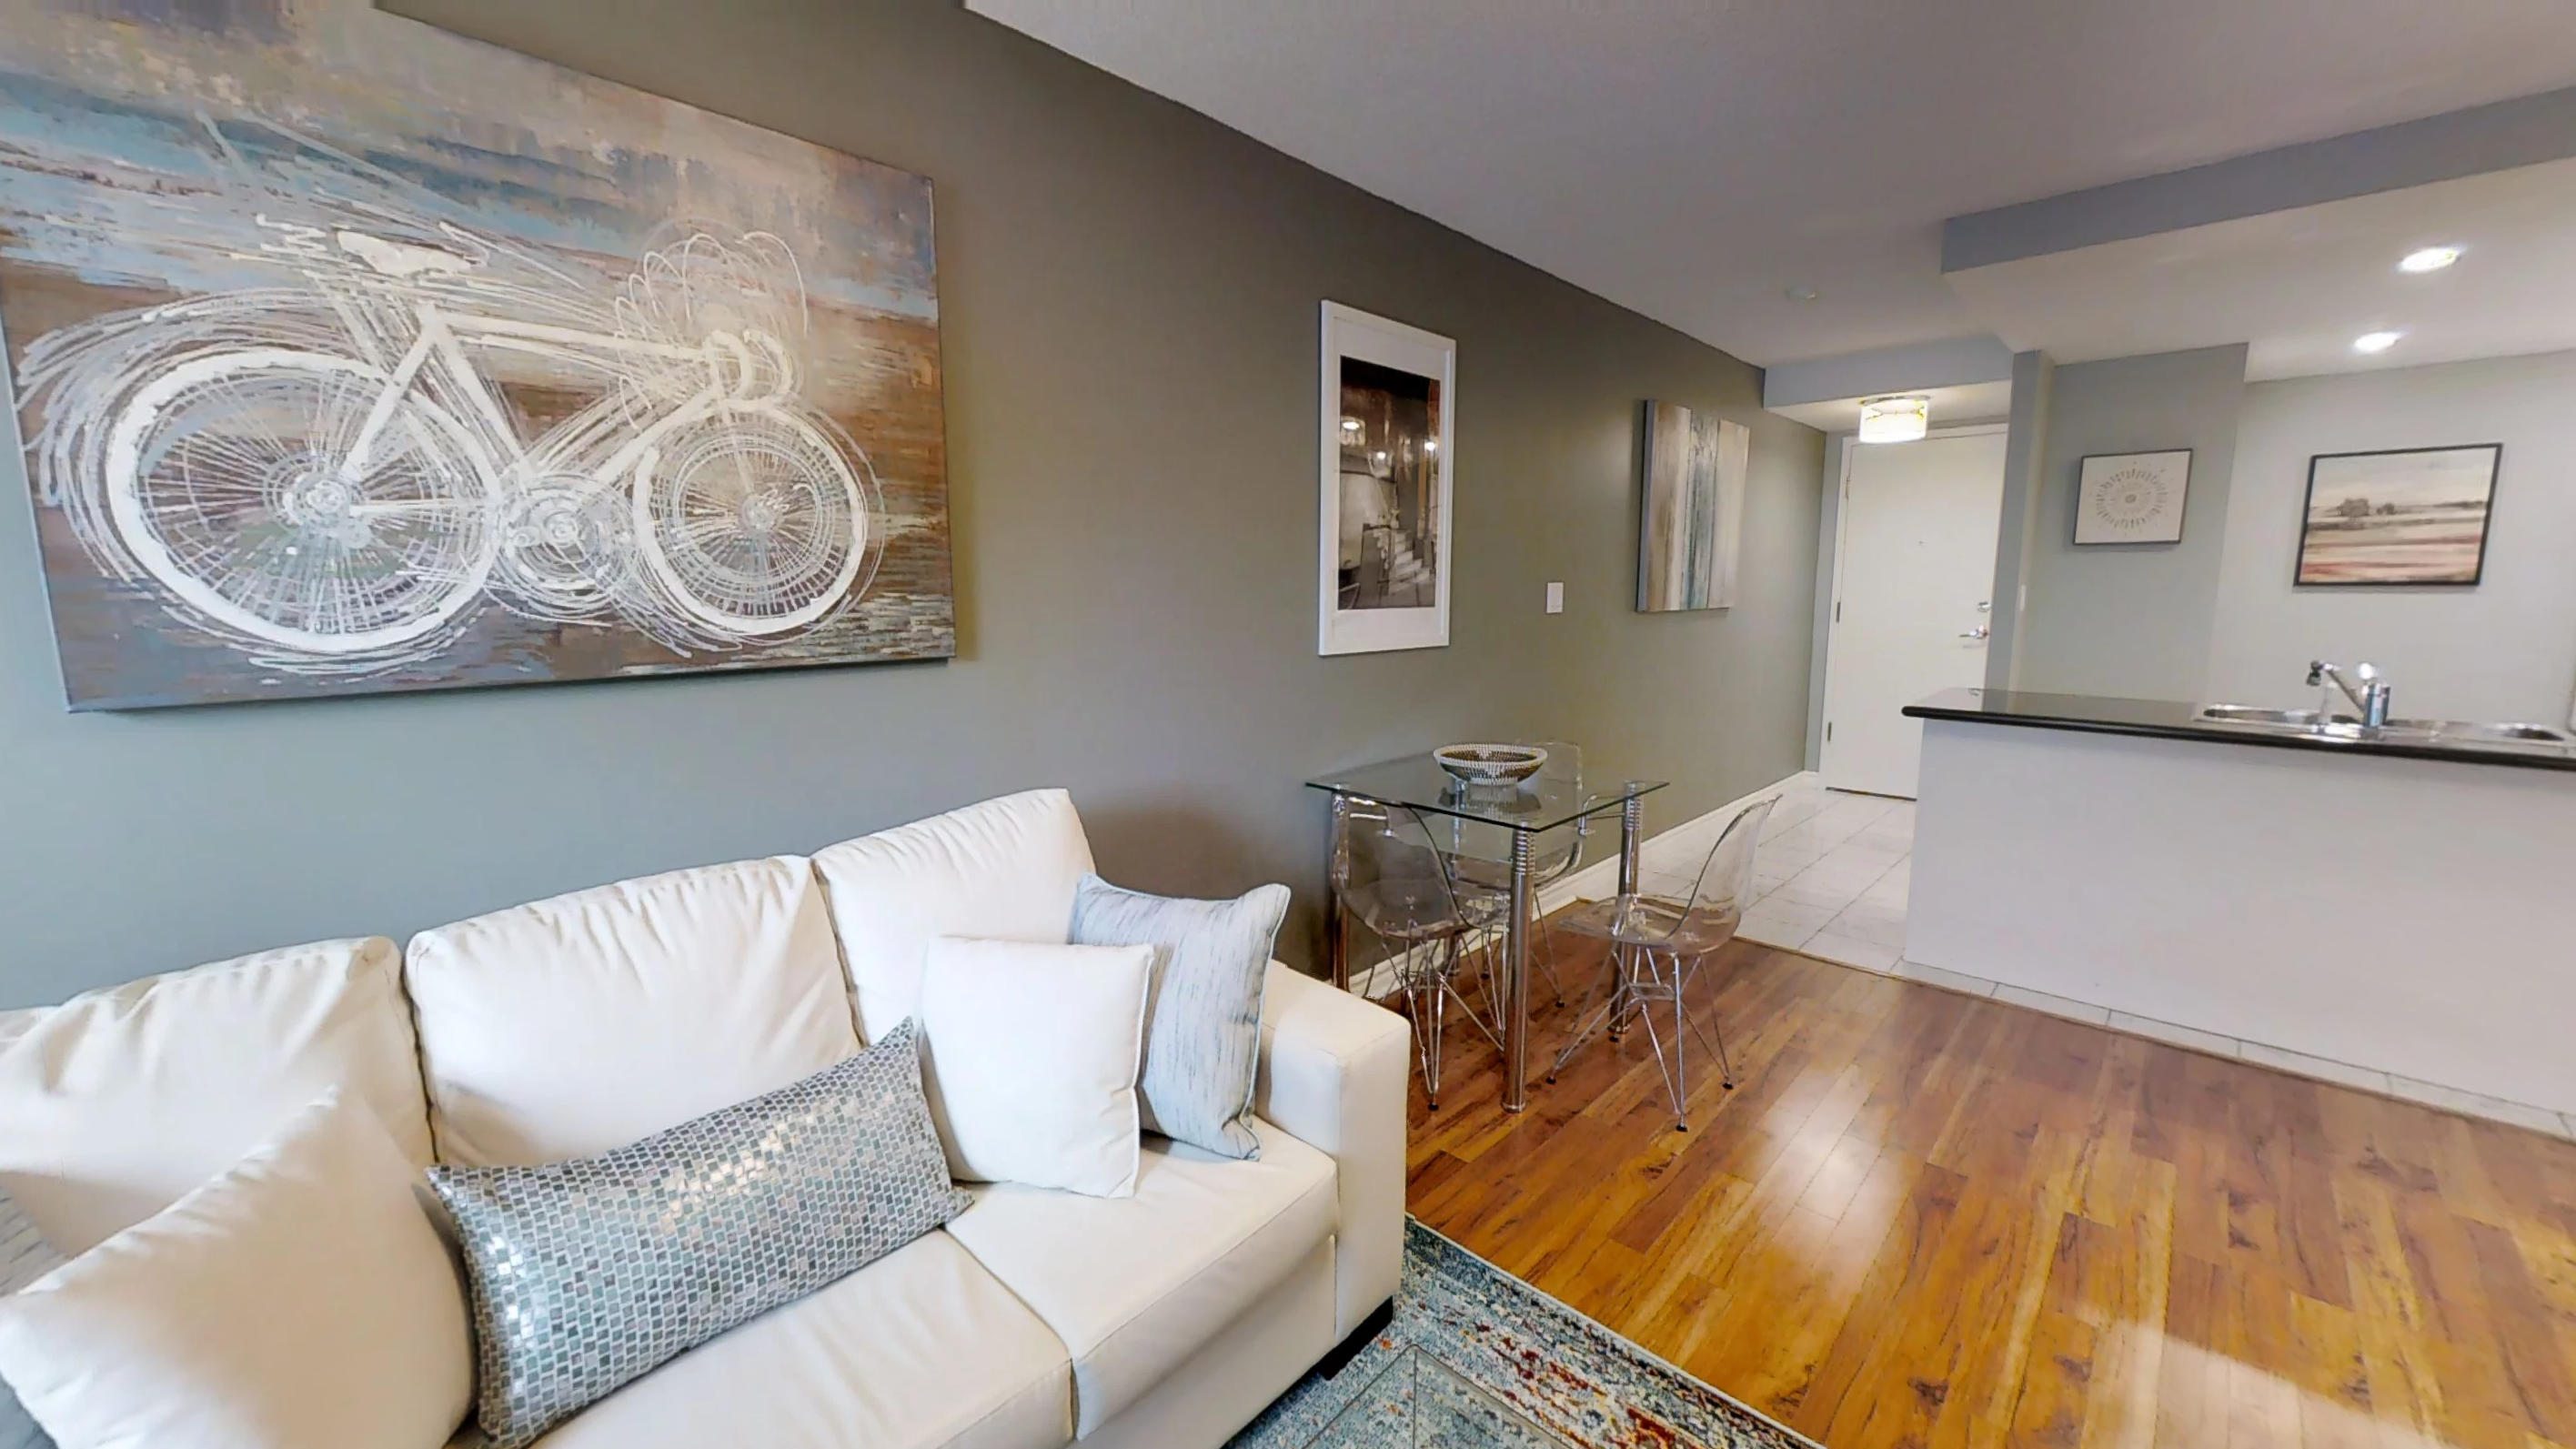 area rug over the hardwood floor in a toronto furnished apartment near simcoe and queen